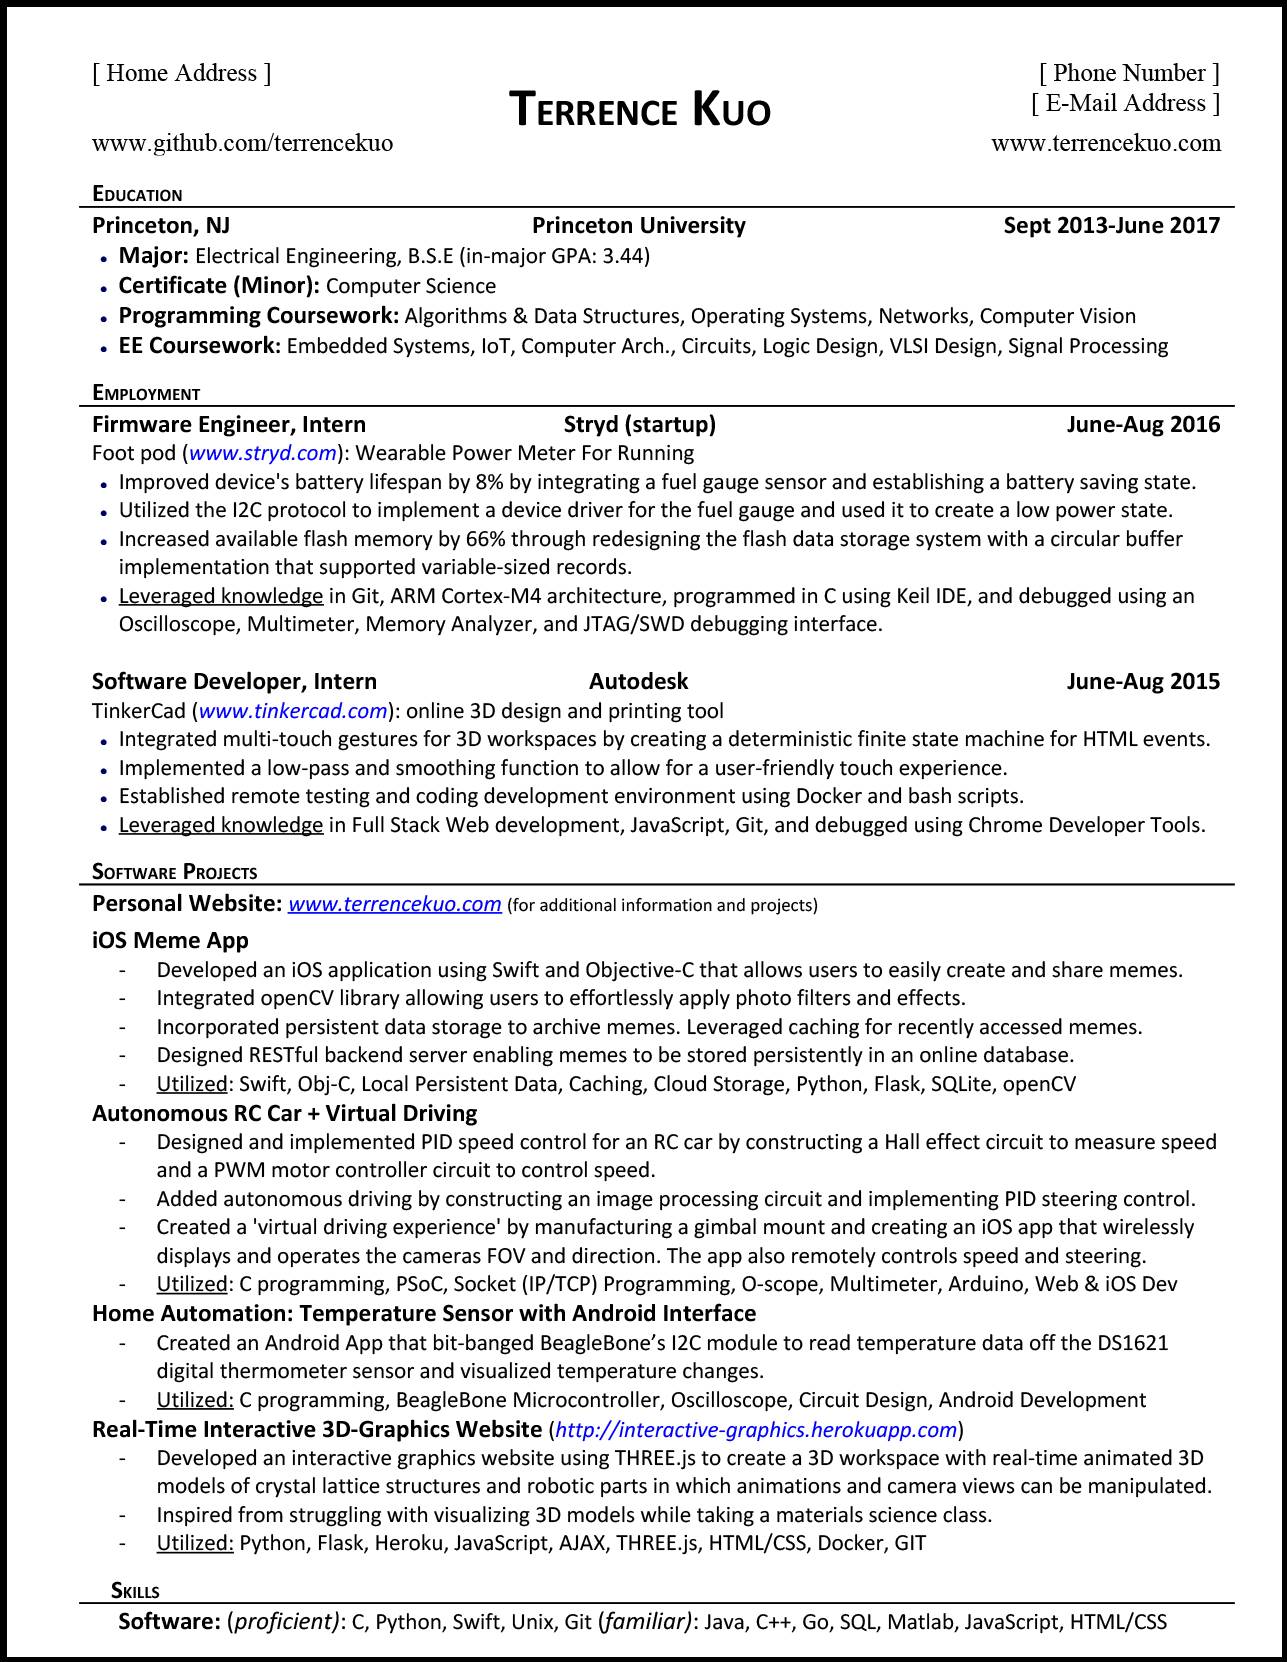 How To Write My Cv For Free Utaheducationfacts com